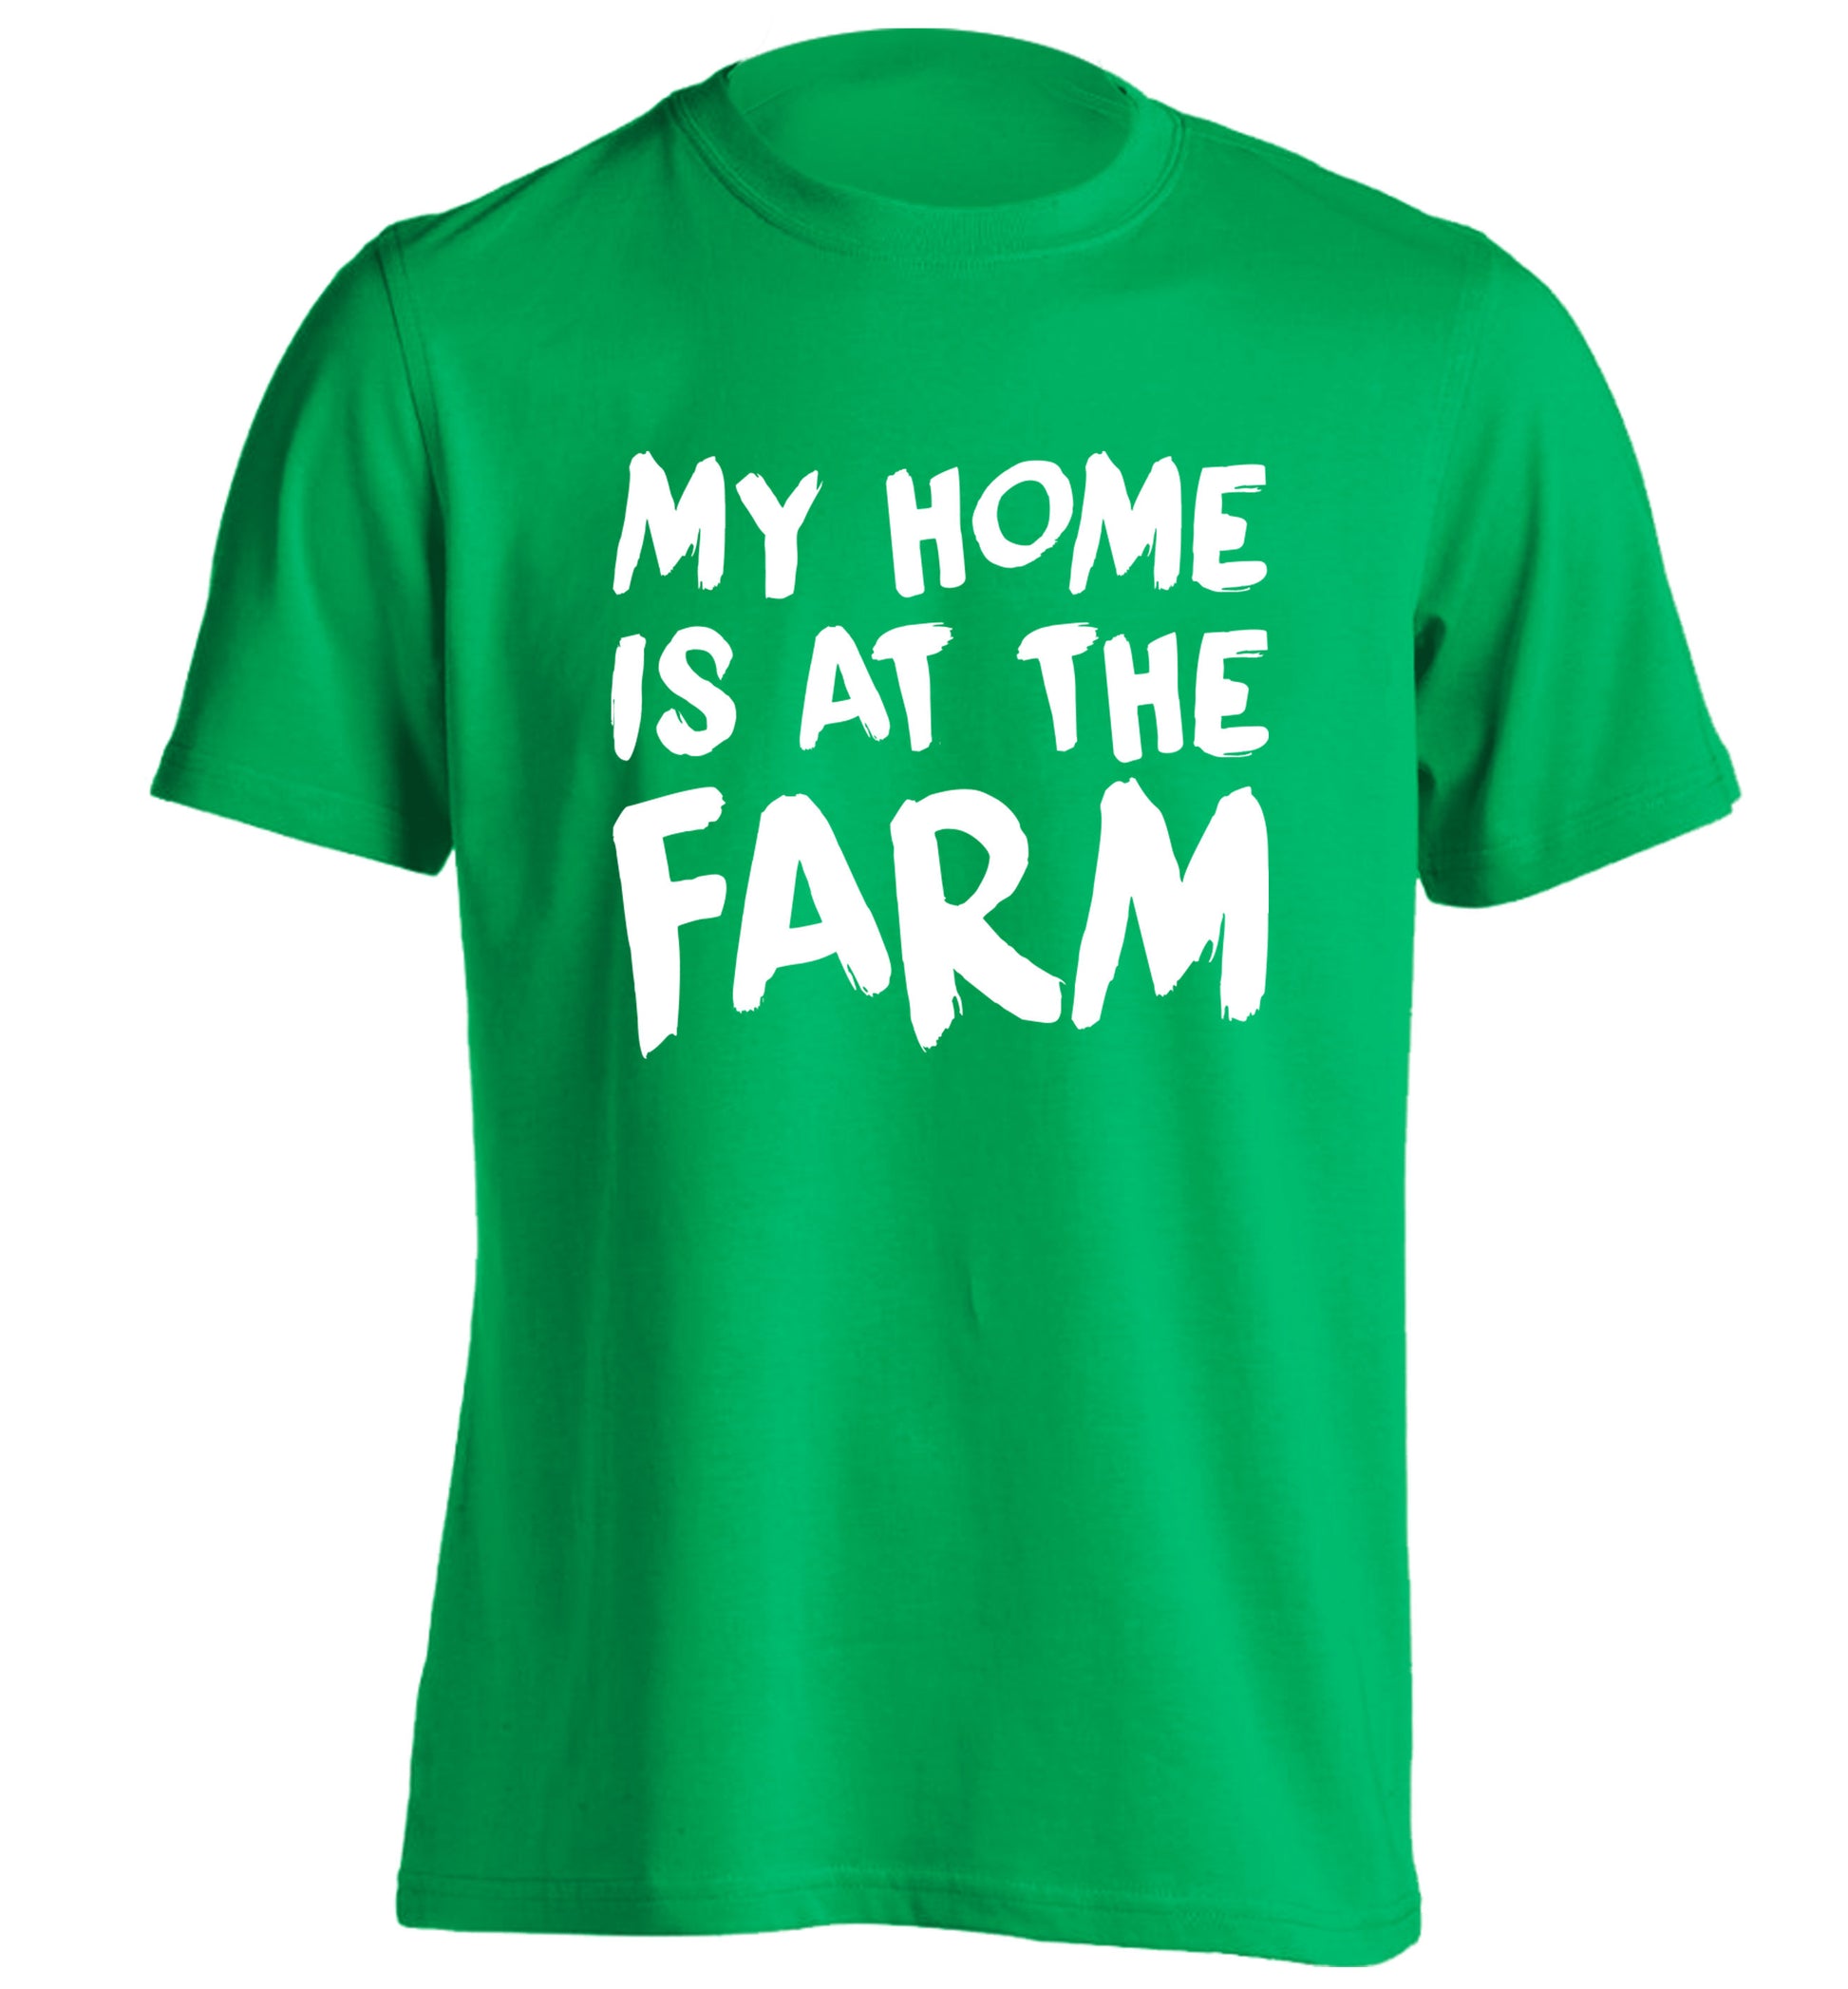 My home is at the farm adults unisex green Tshirt 2XL